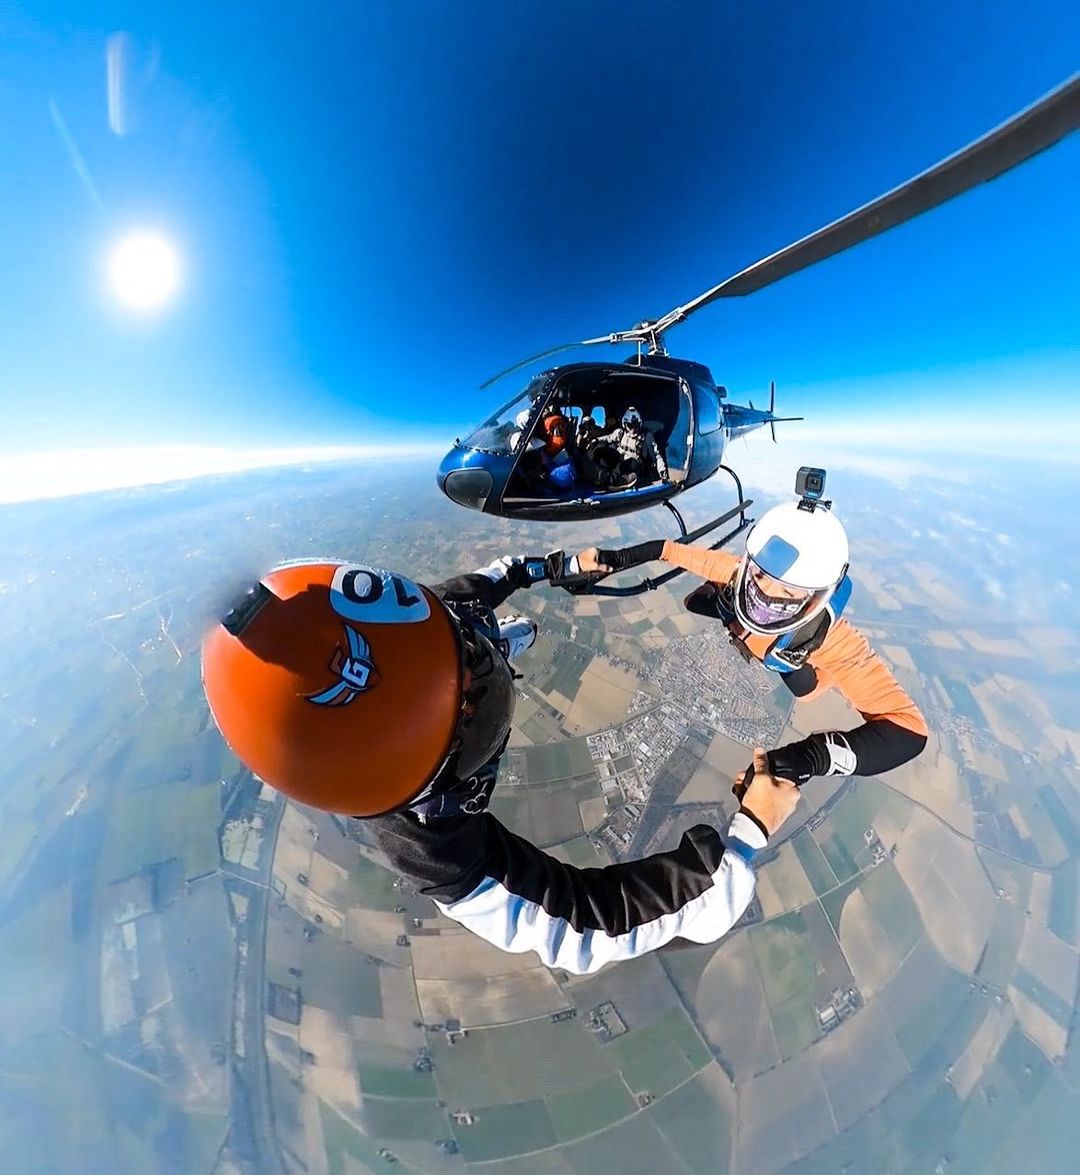 Free-falling through the clouds with #GoProFamily member sandrobigozzi (IG) + #GoProMAX! 🪂 #GoProMAX is… 👉 3 cameras in 1 👉 Fit with immersive 360 audio 👉 Compatible with over 30 mounts + accessories #GoPro #GoProUK #SkyDiving #Helicopter #360Degrees